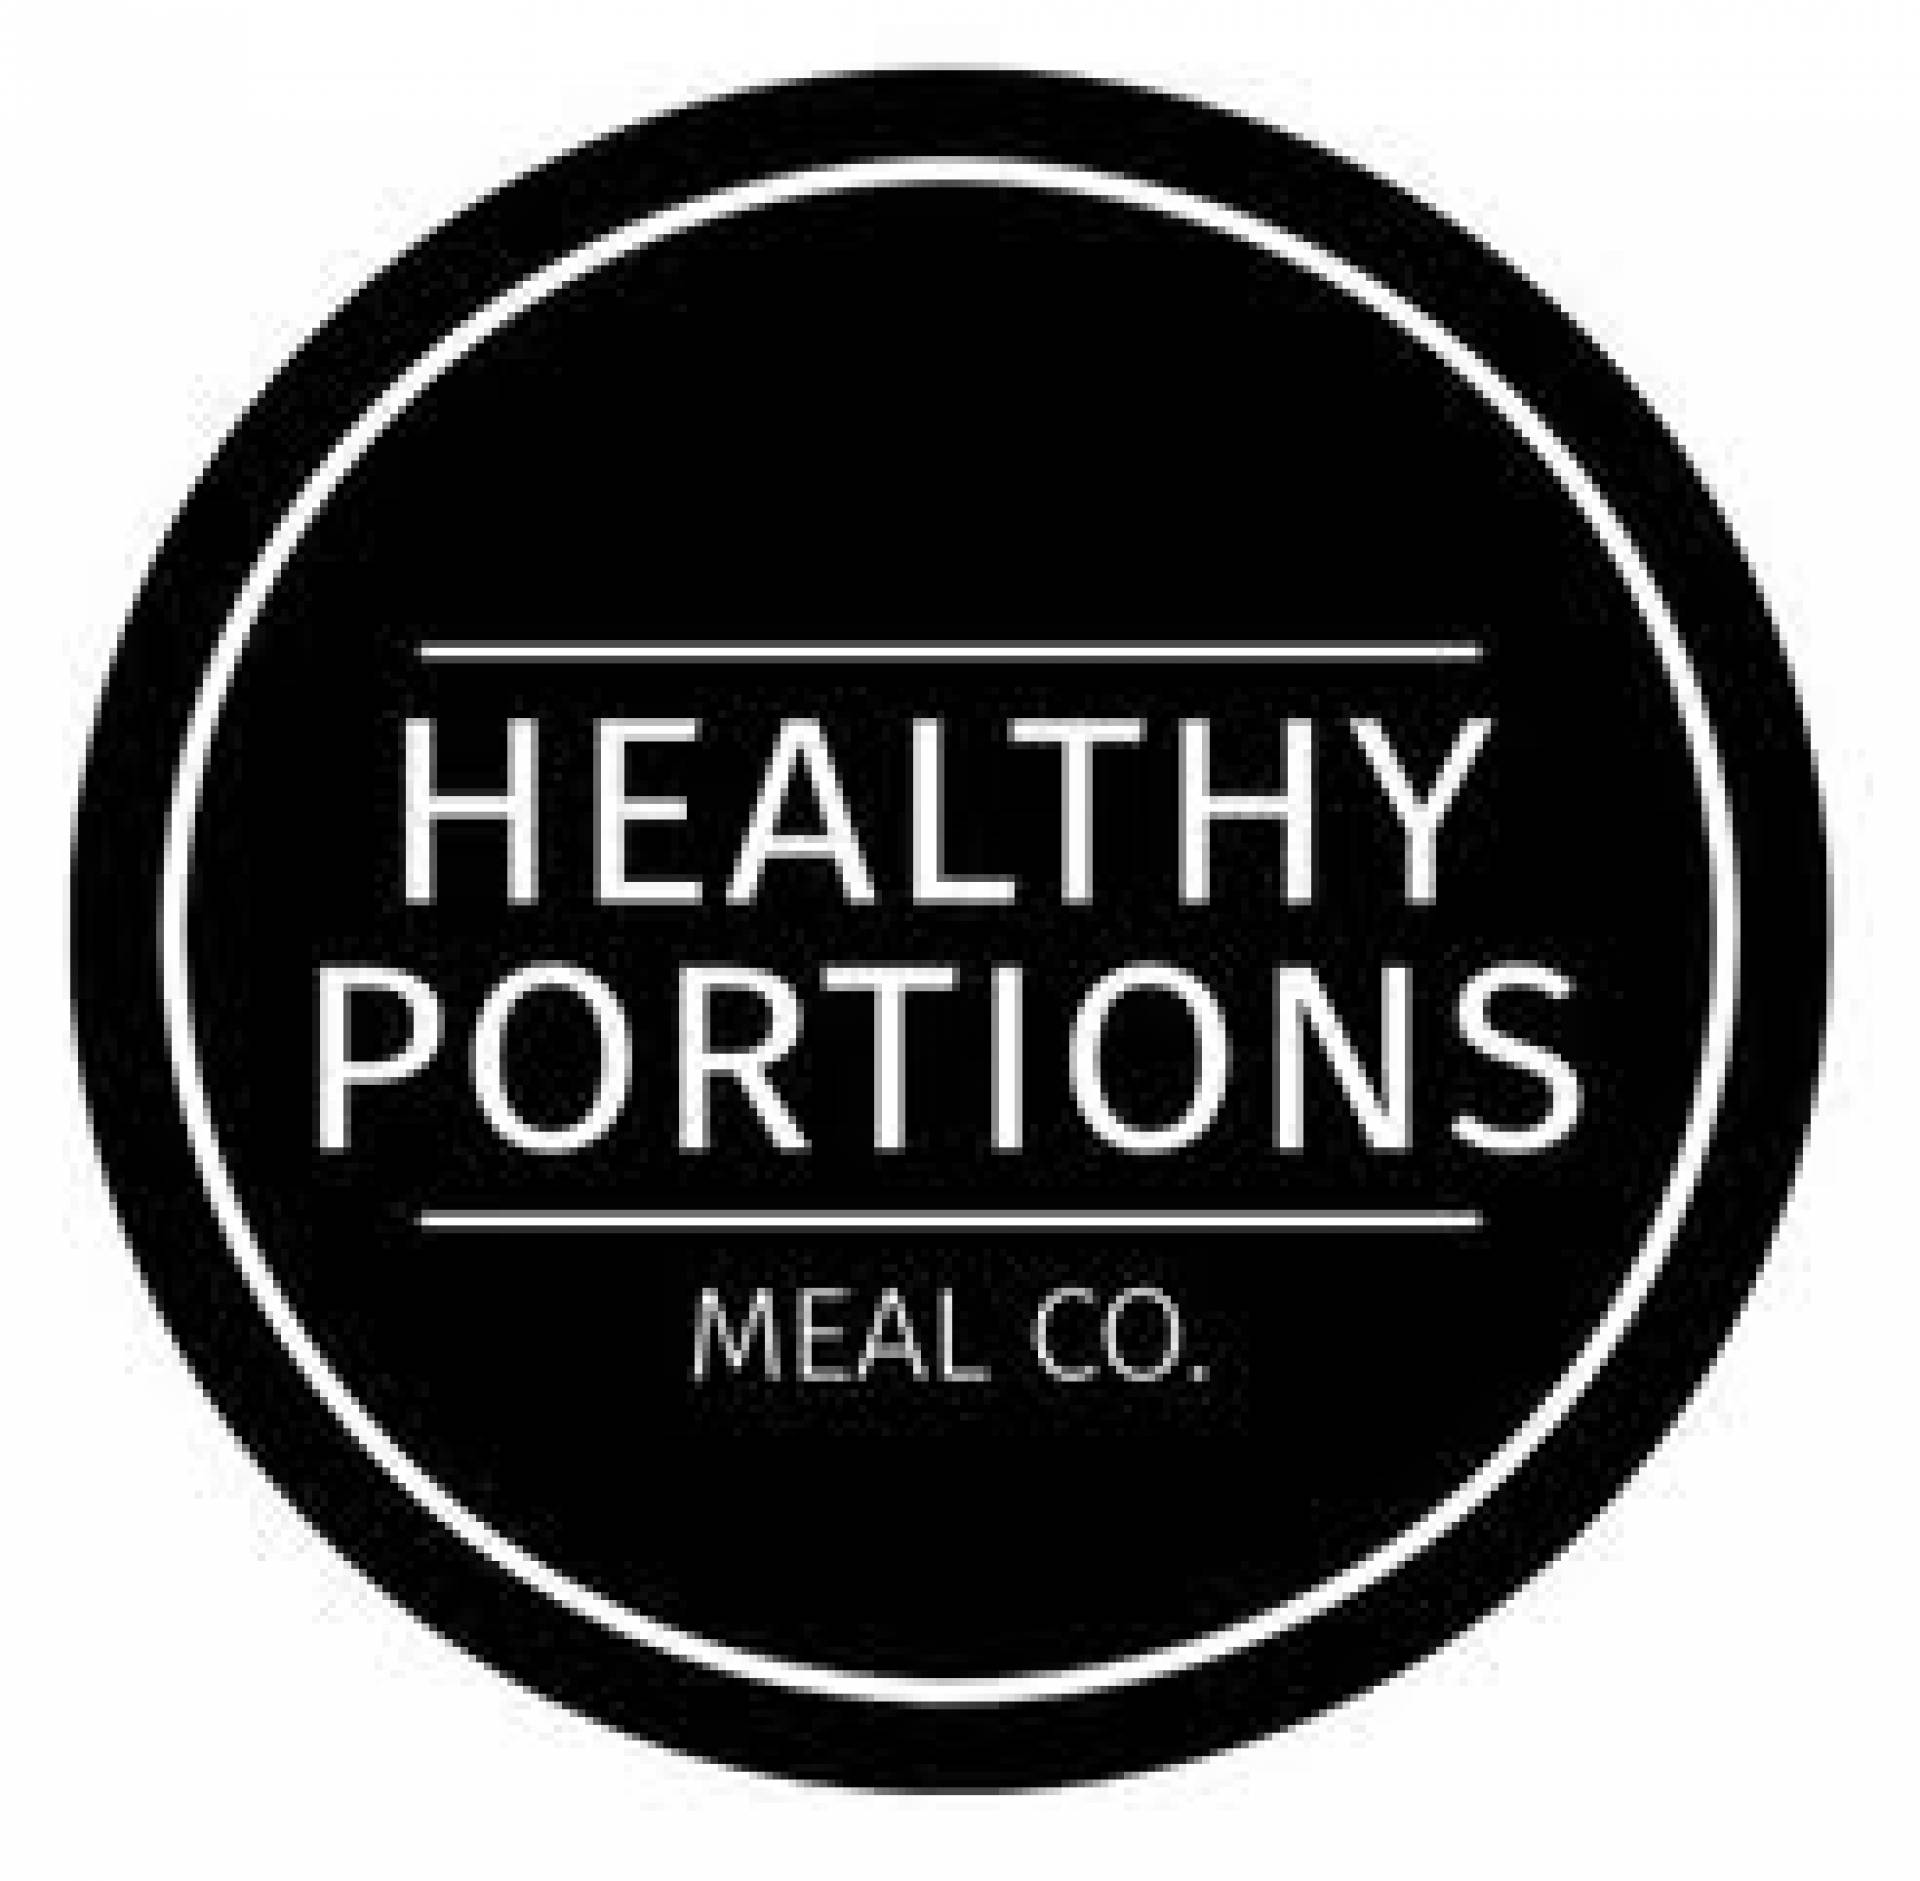 Healthy Portions Meal Co. logo